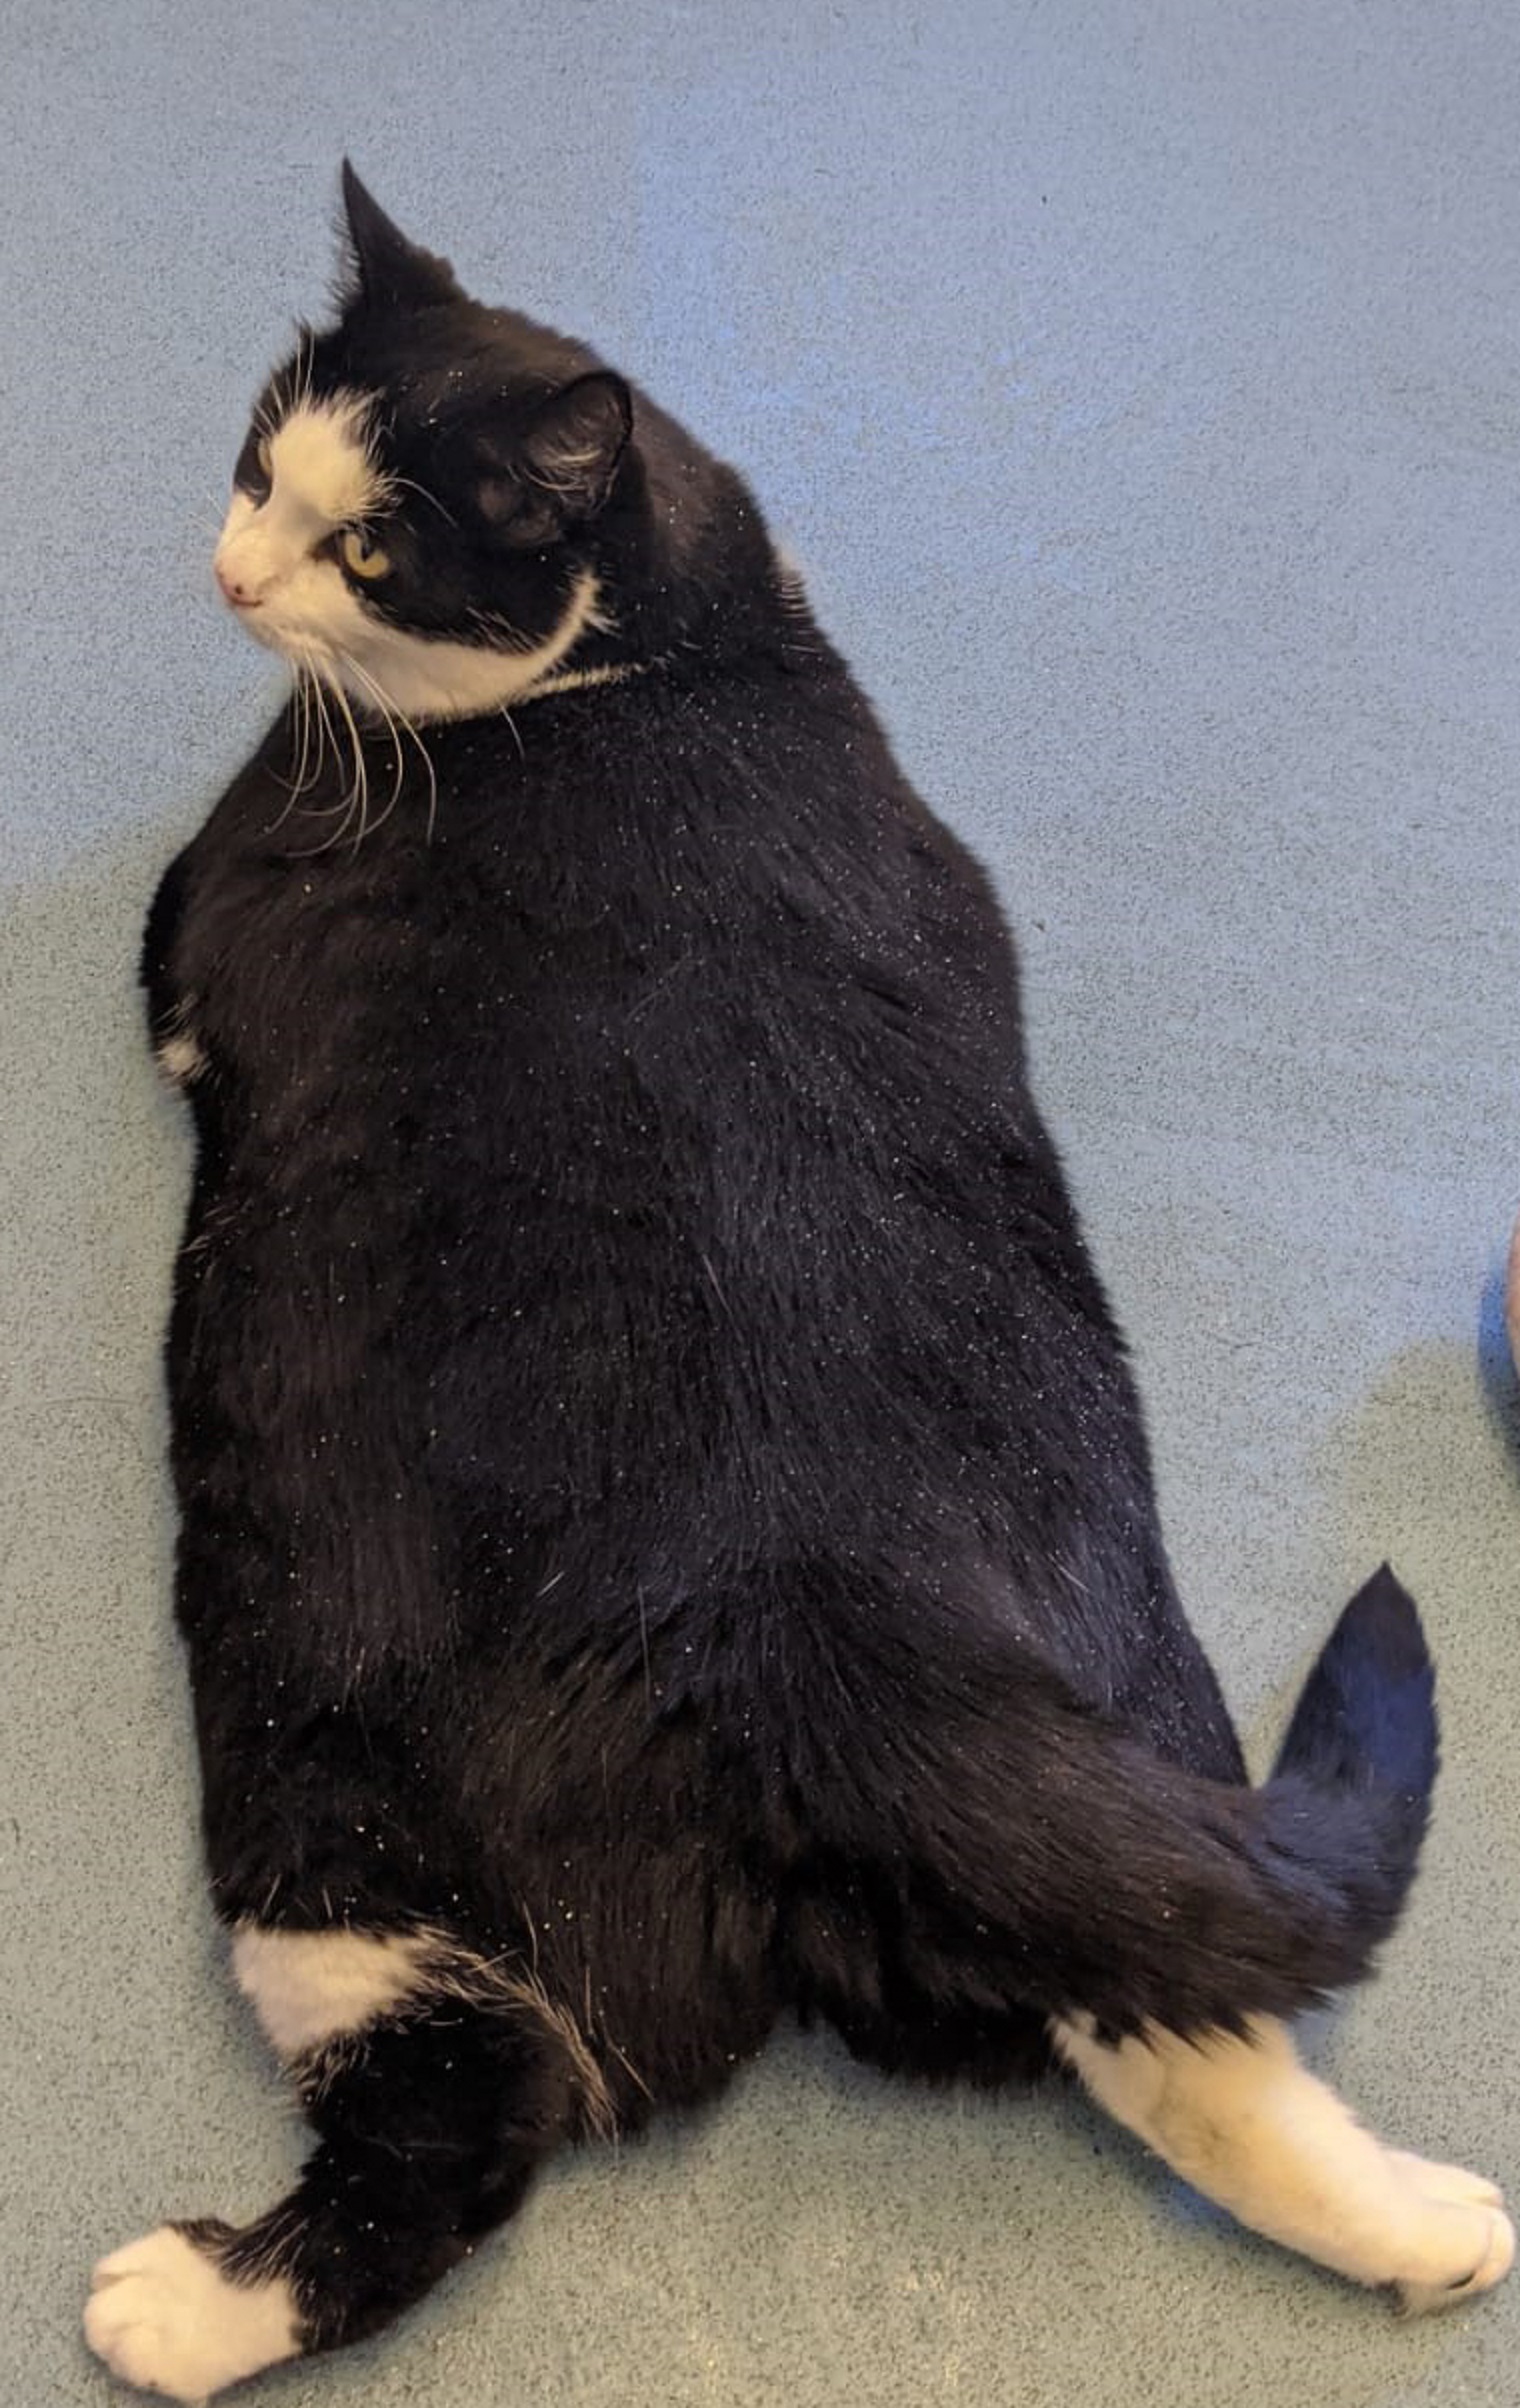 Animal Charity Sends Weight Warning After Cat Tips Scales At 24lb The Irish News